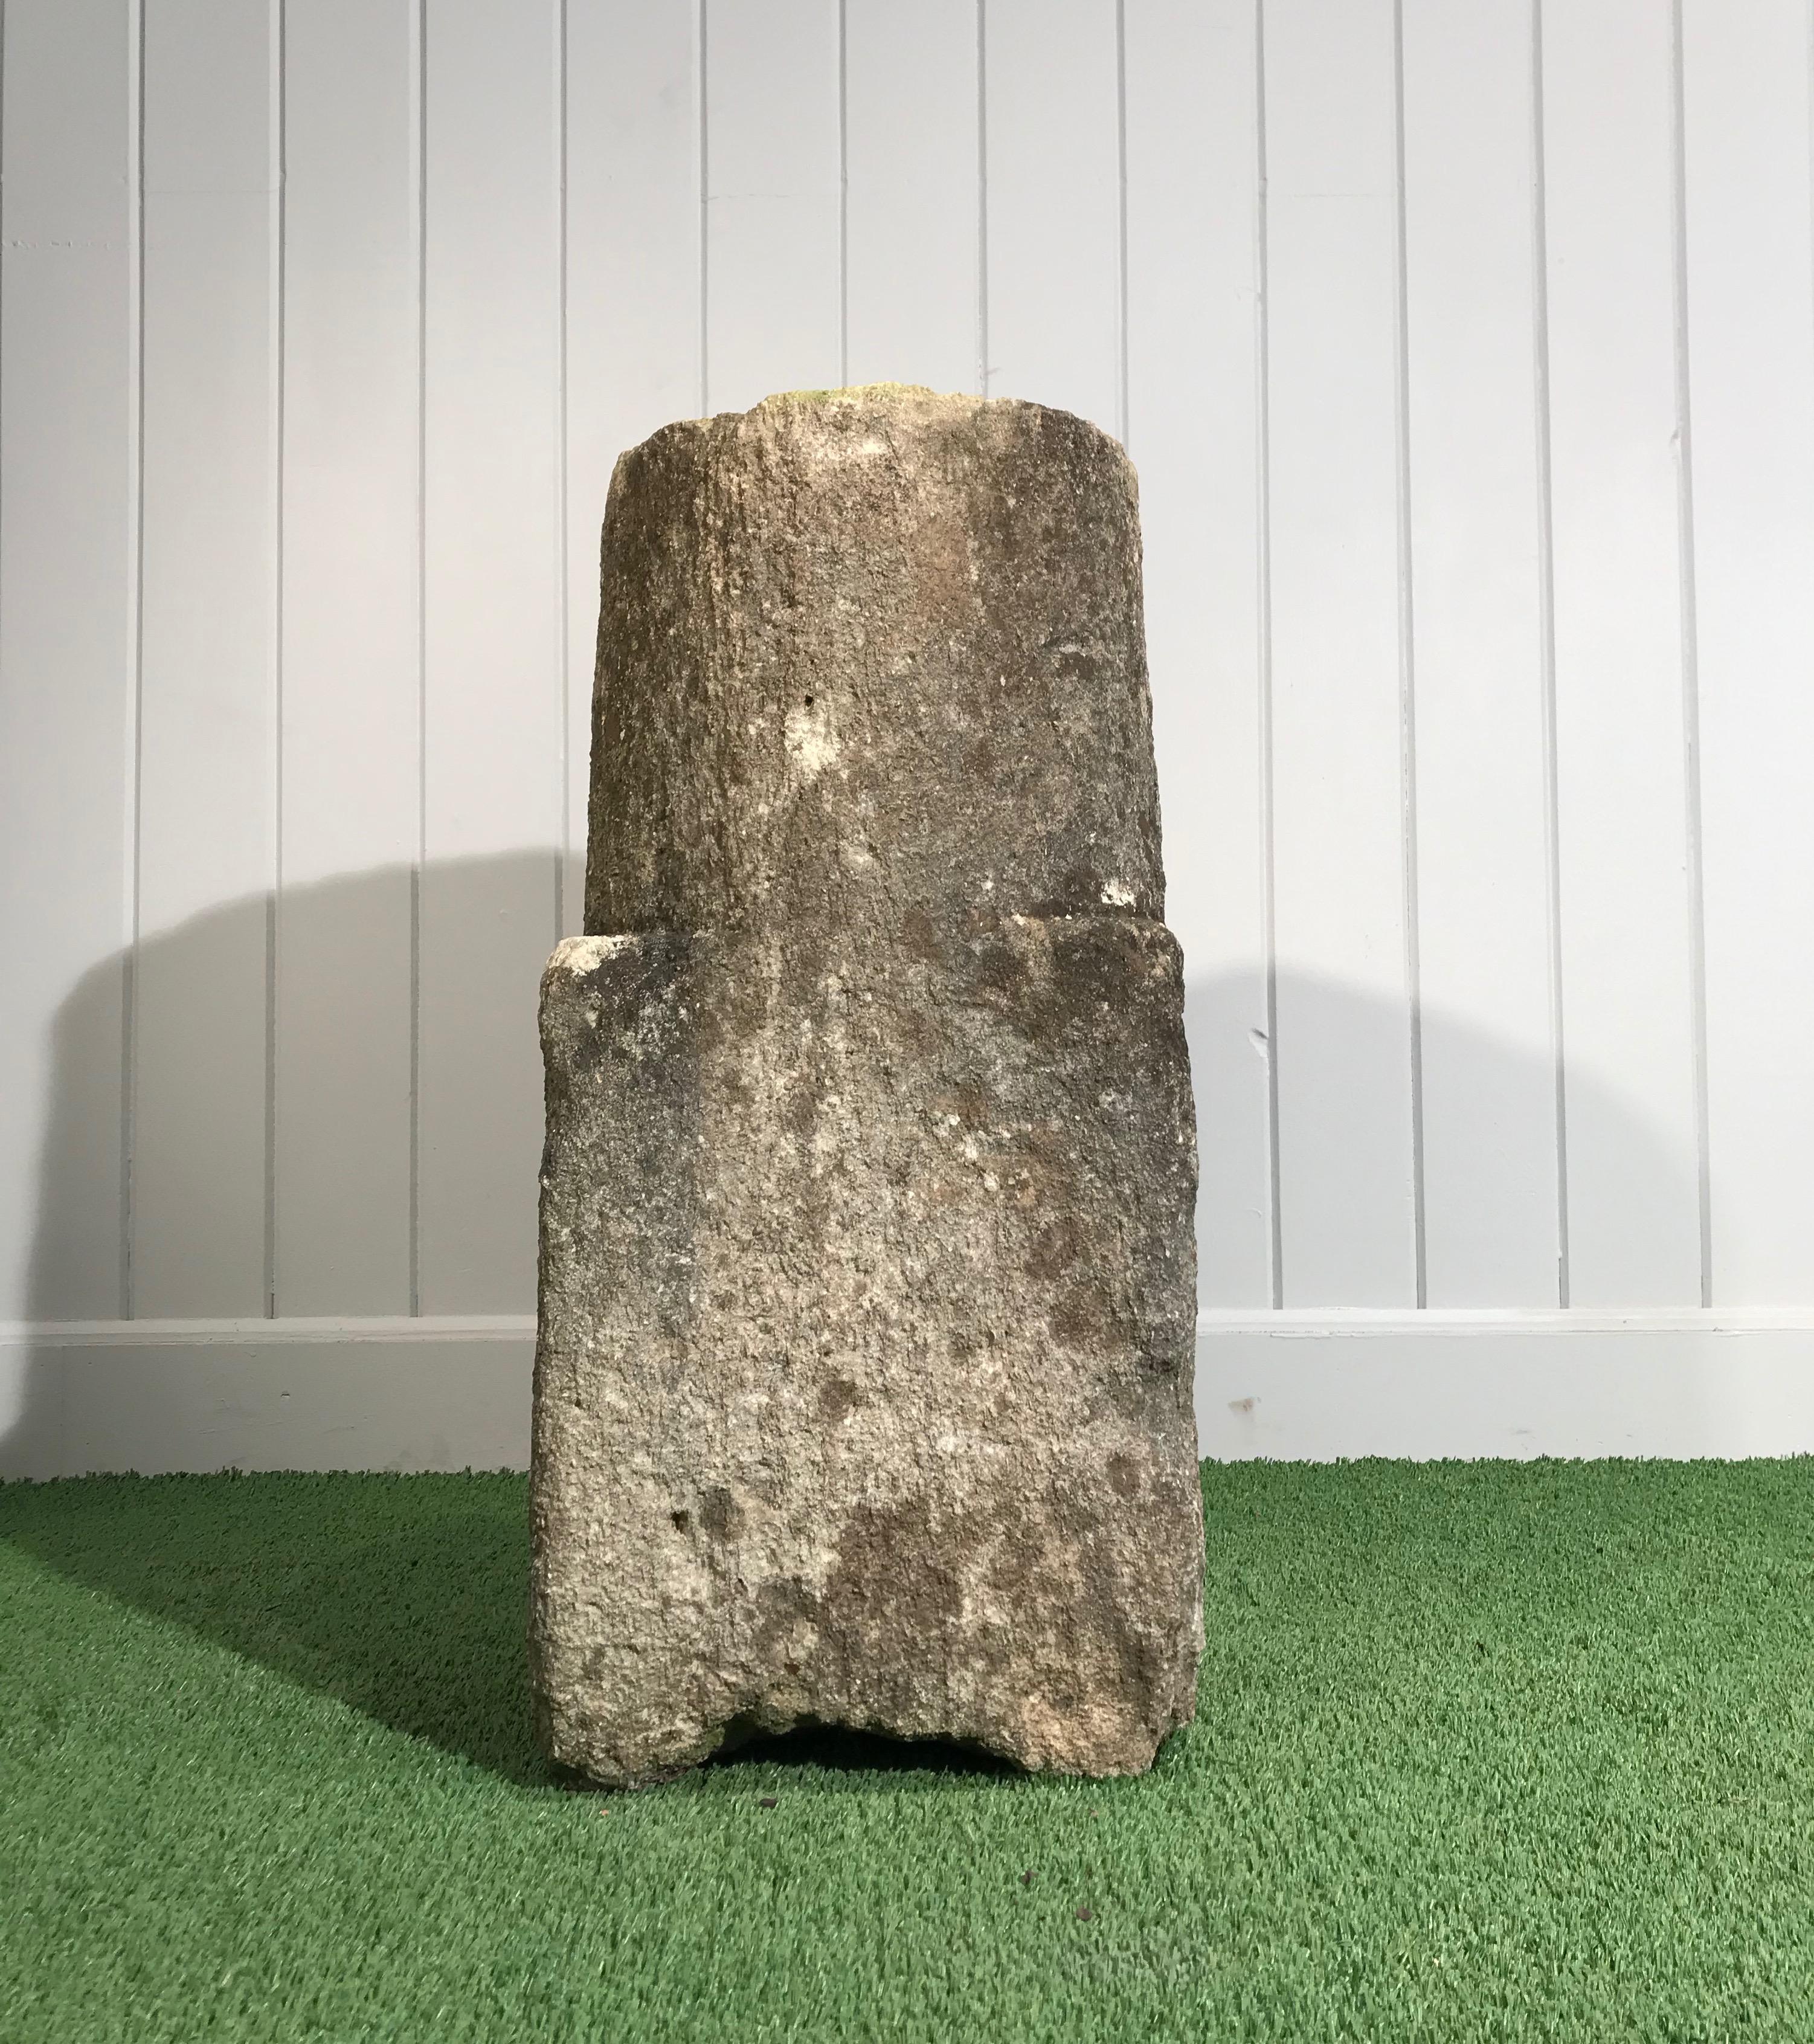 This early and beautifully-patinated carved stone piece was originally a roadside marker, but, sometime in the past, was cut down a bit so that the top can now accept a piece of sculpture or urn. It would make a wonderful centerpiece in a small